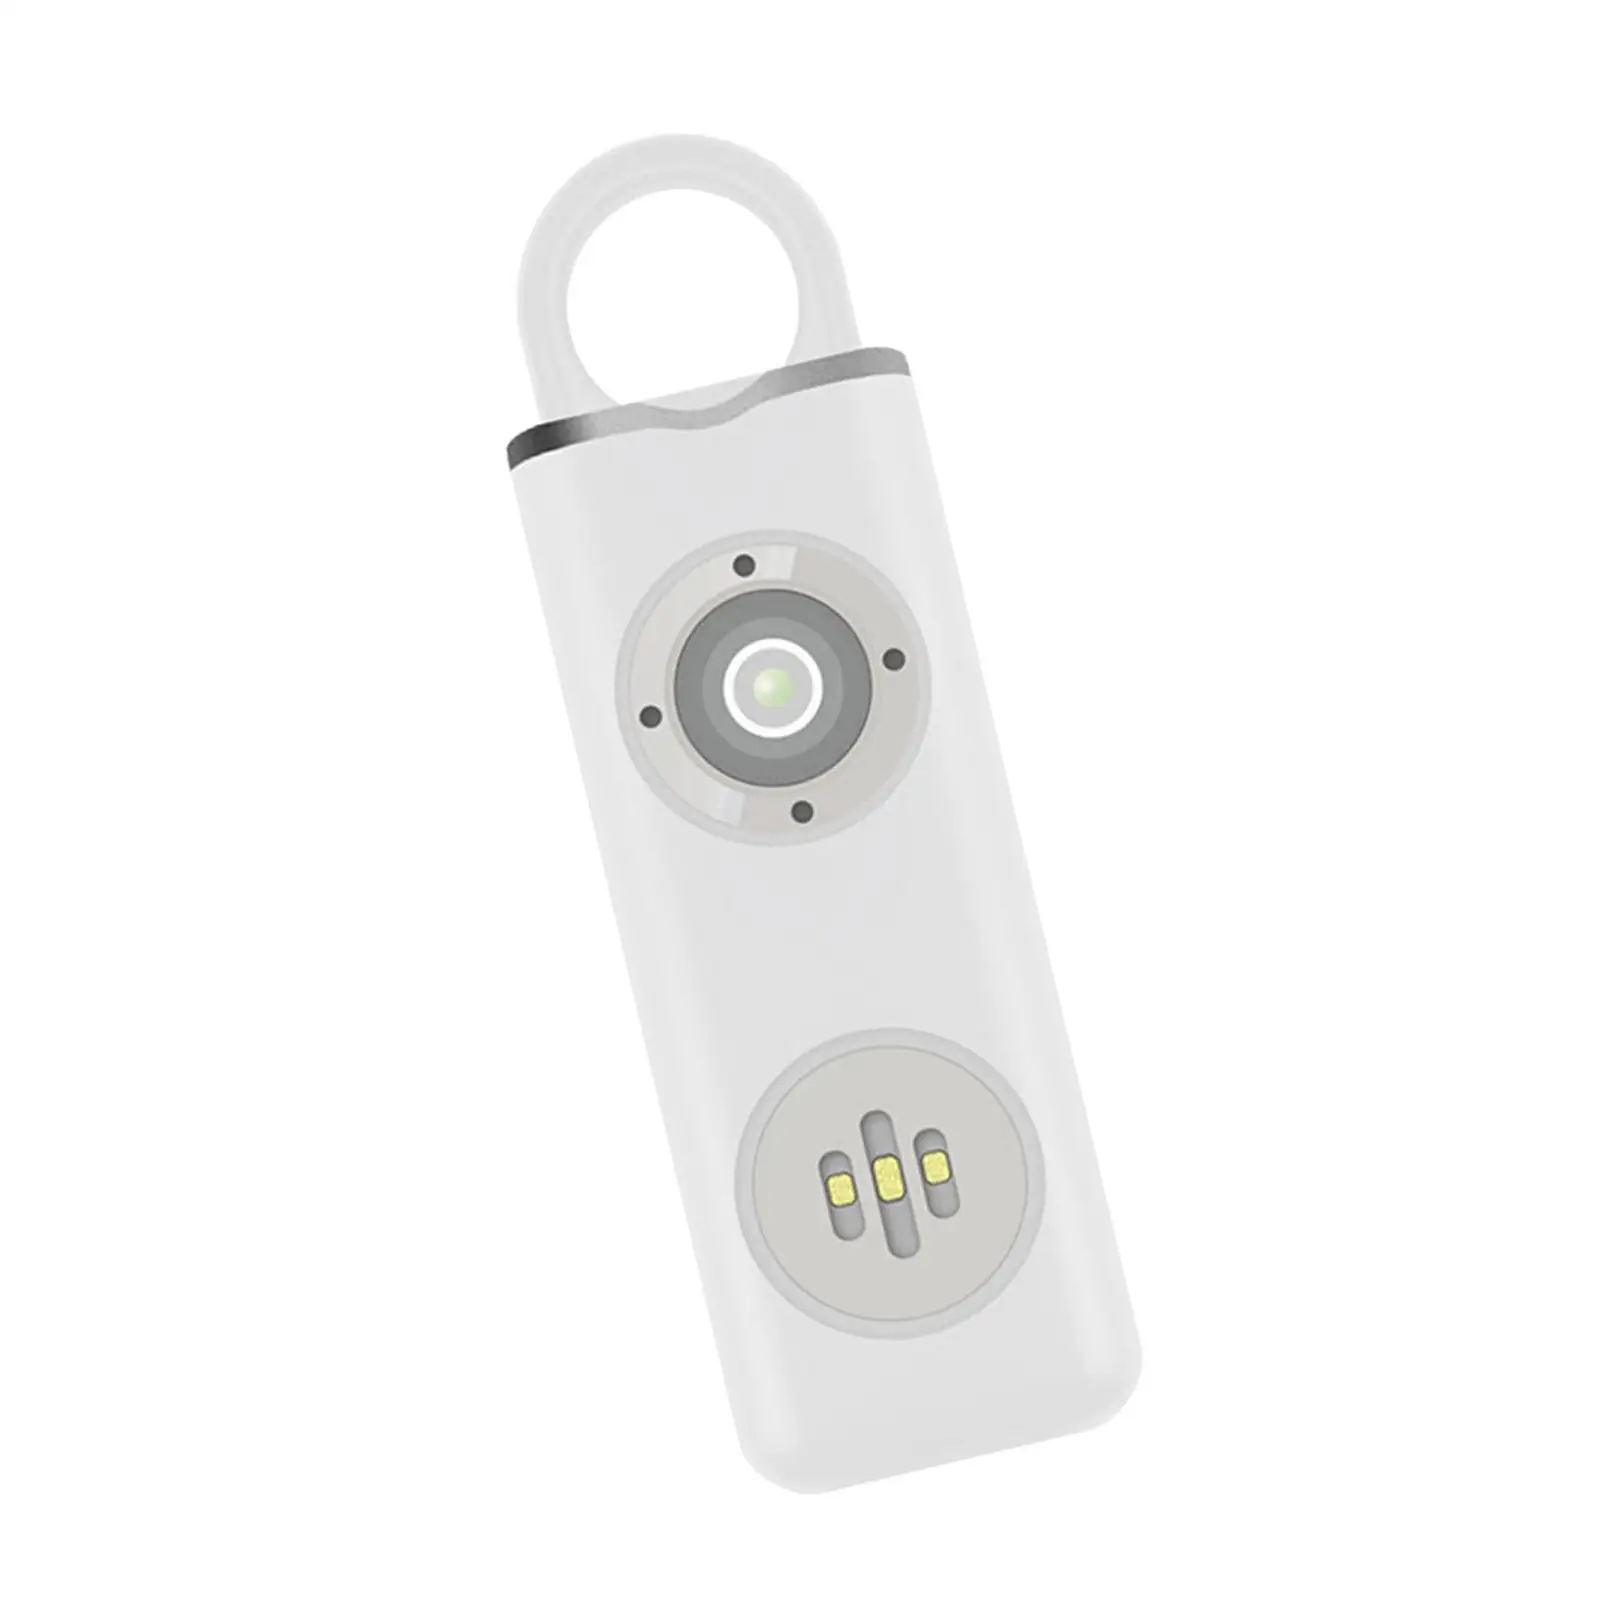 130dB Personal Alarm with LED Lights Carabiner Emergency Safety Alarm Alarm Sound Safety for Camping Hiking